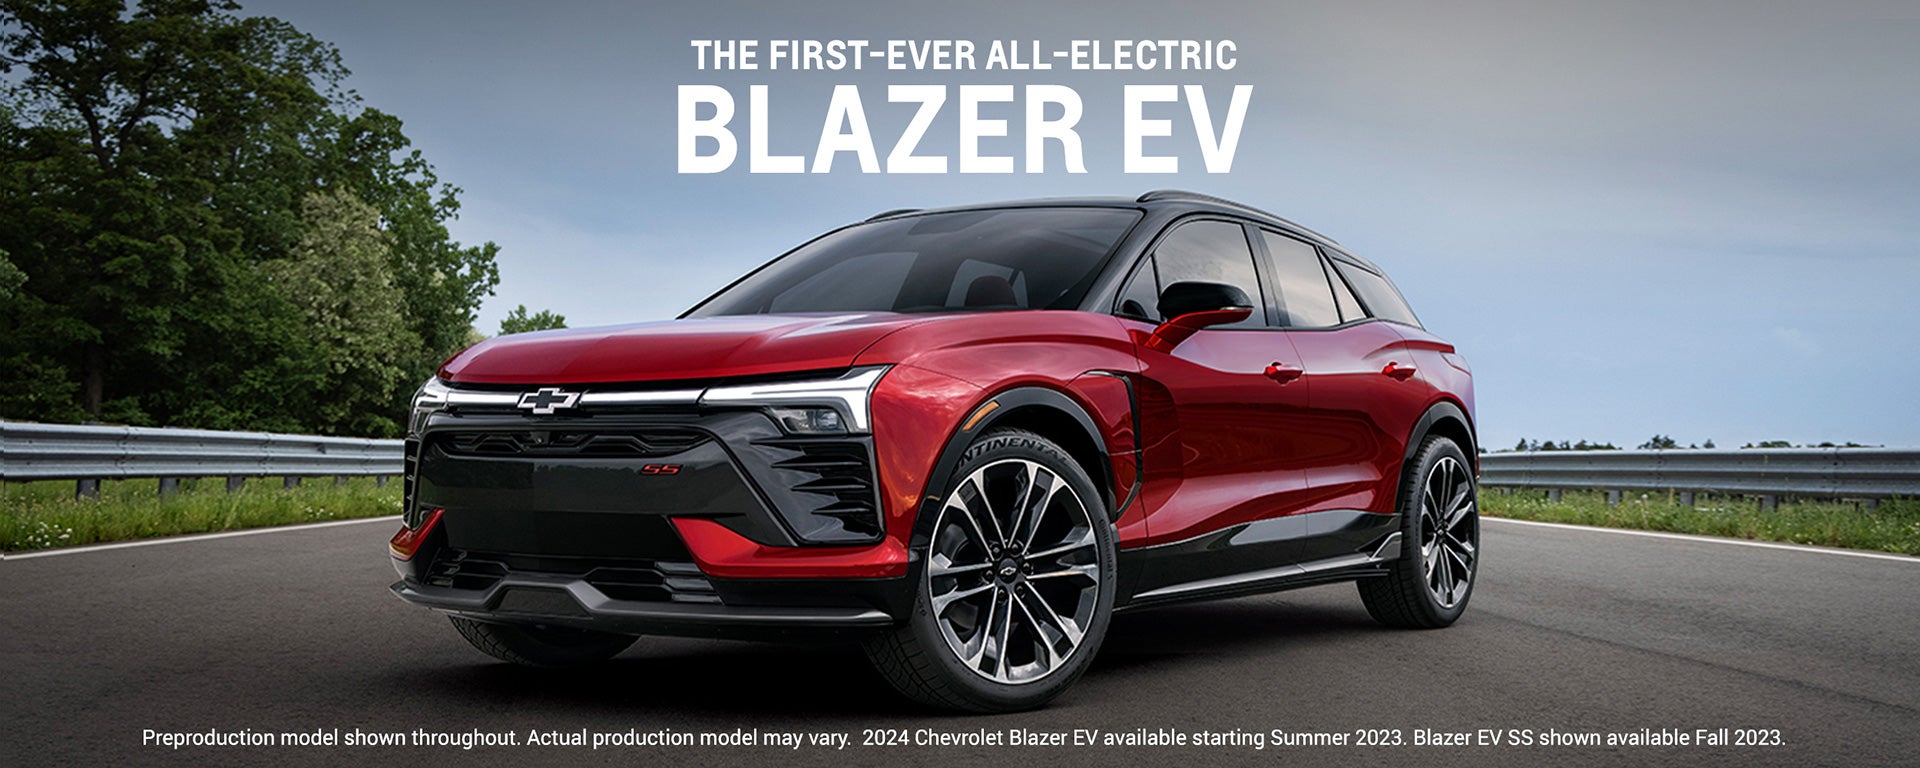 The First-ever All-electric Blazer EV | Jerry's Chevrolet in Baltimore MD